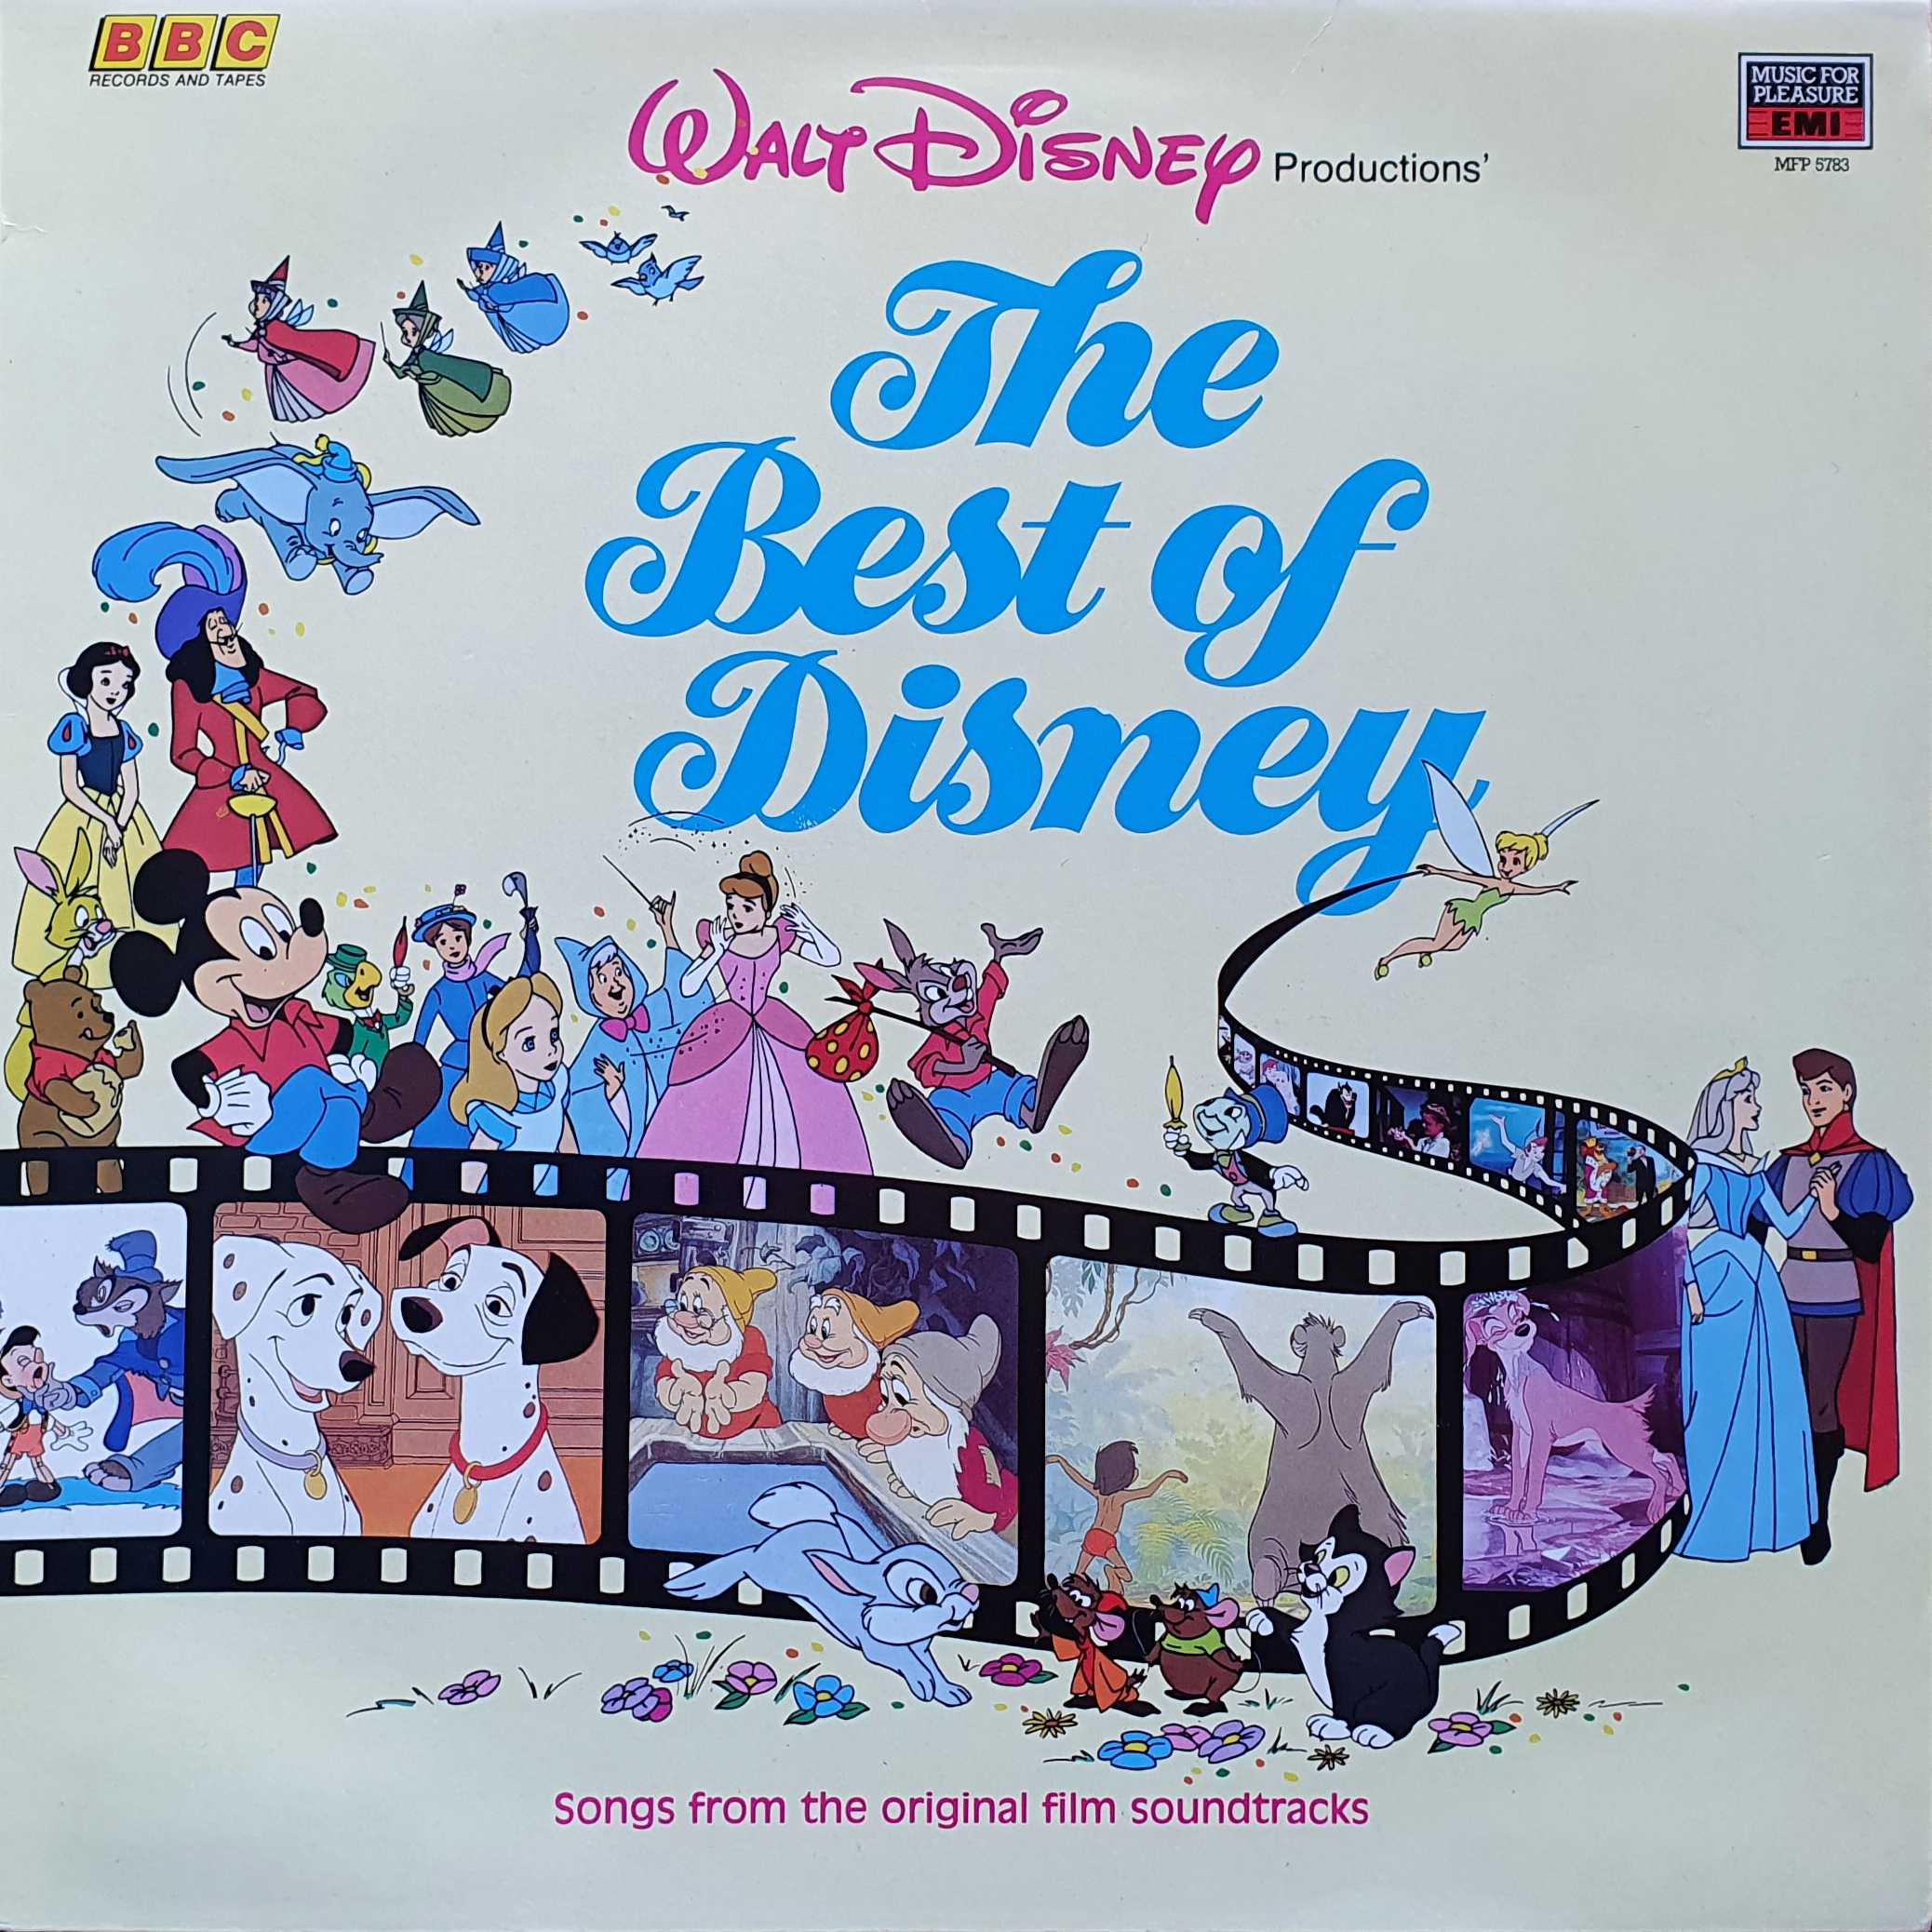 Picture of The best of Disney by artist Various from the BBC albums - Records and Tapes library